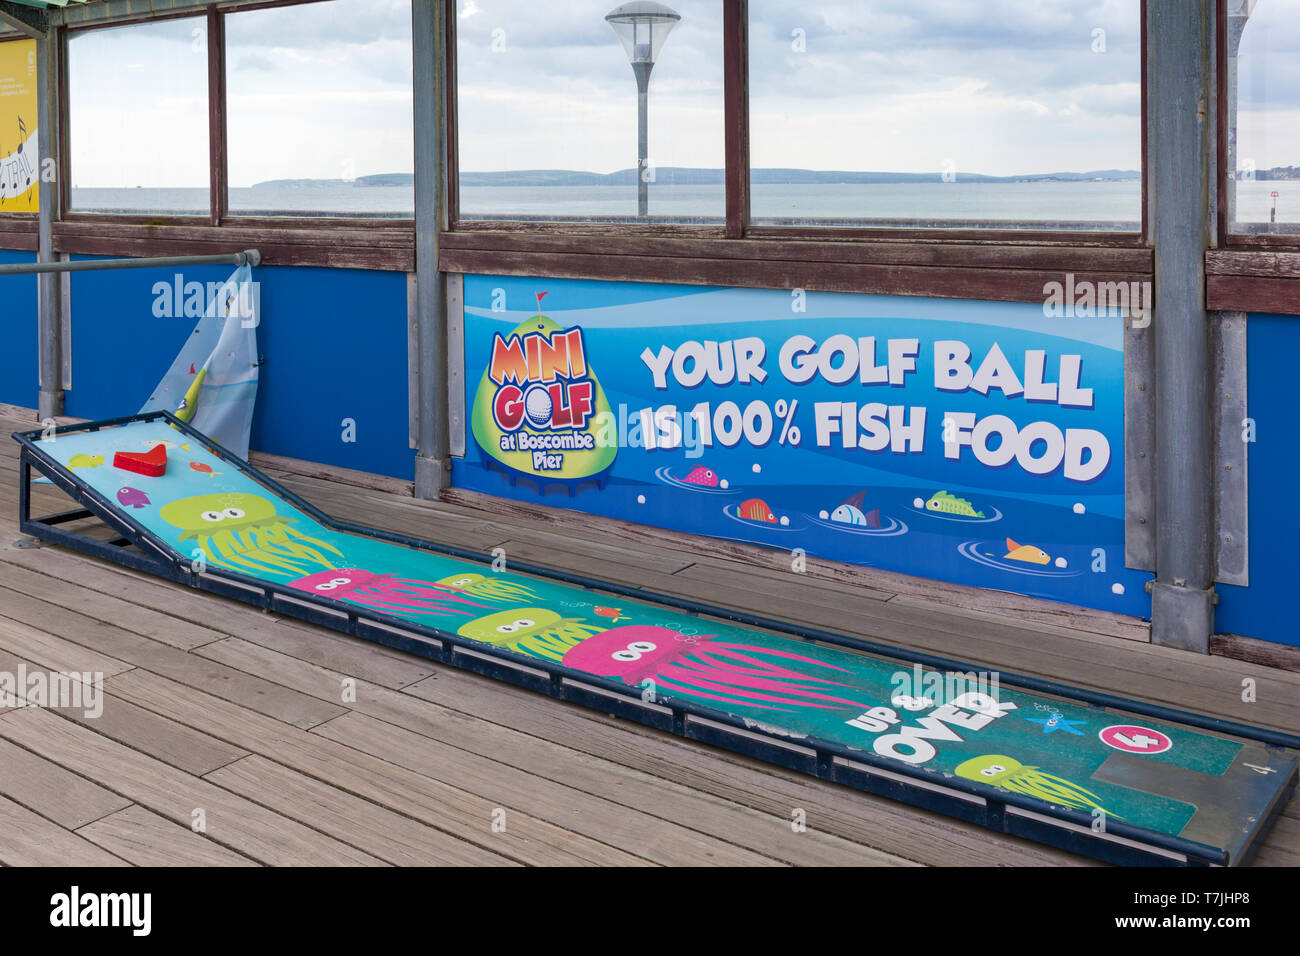 Mini Golf played with golf balls 100% fish food on Boscombe Pier,  Bournemouth, Dorset UK in May Stock Photo - Alamy